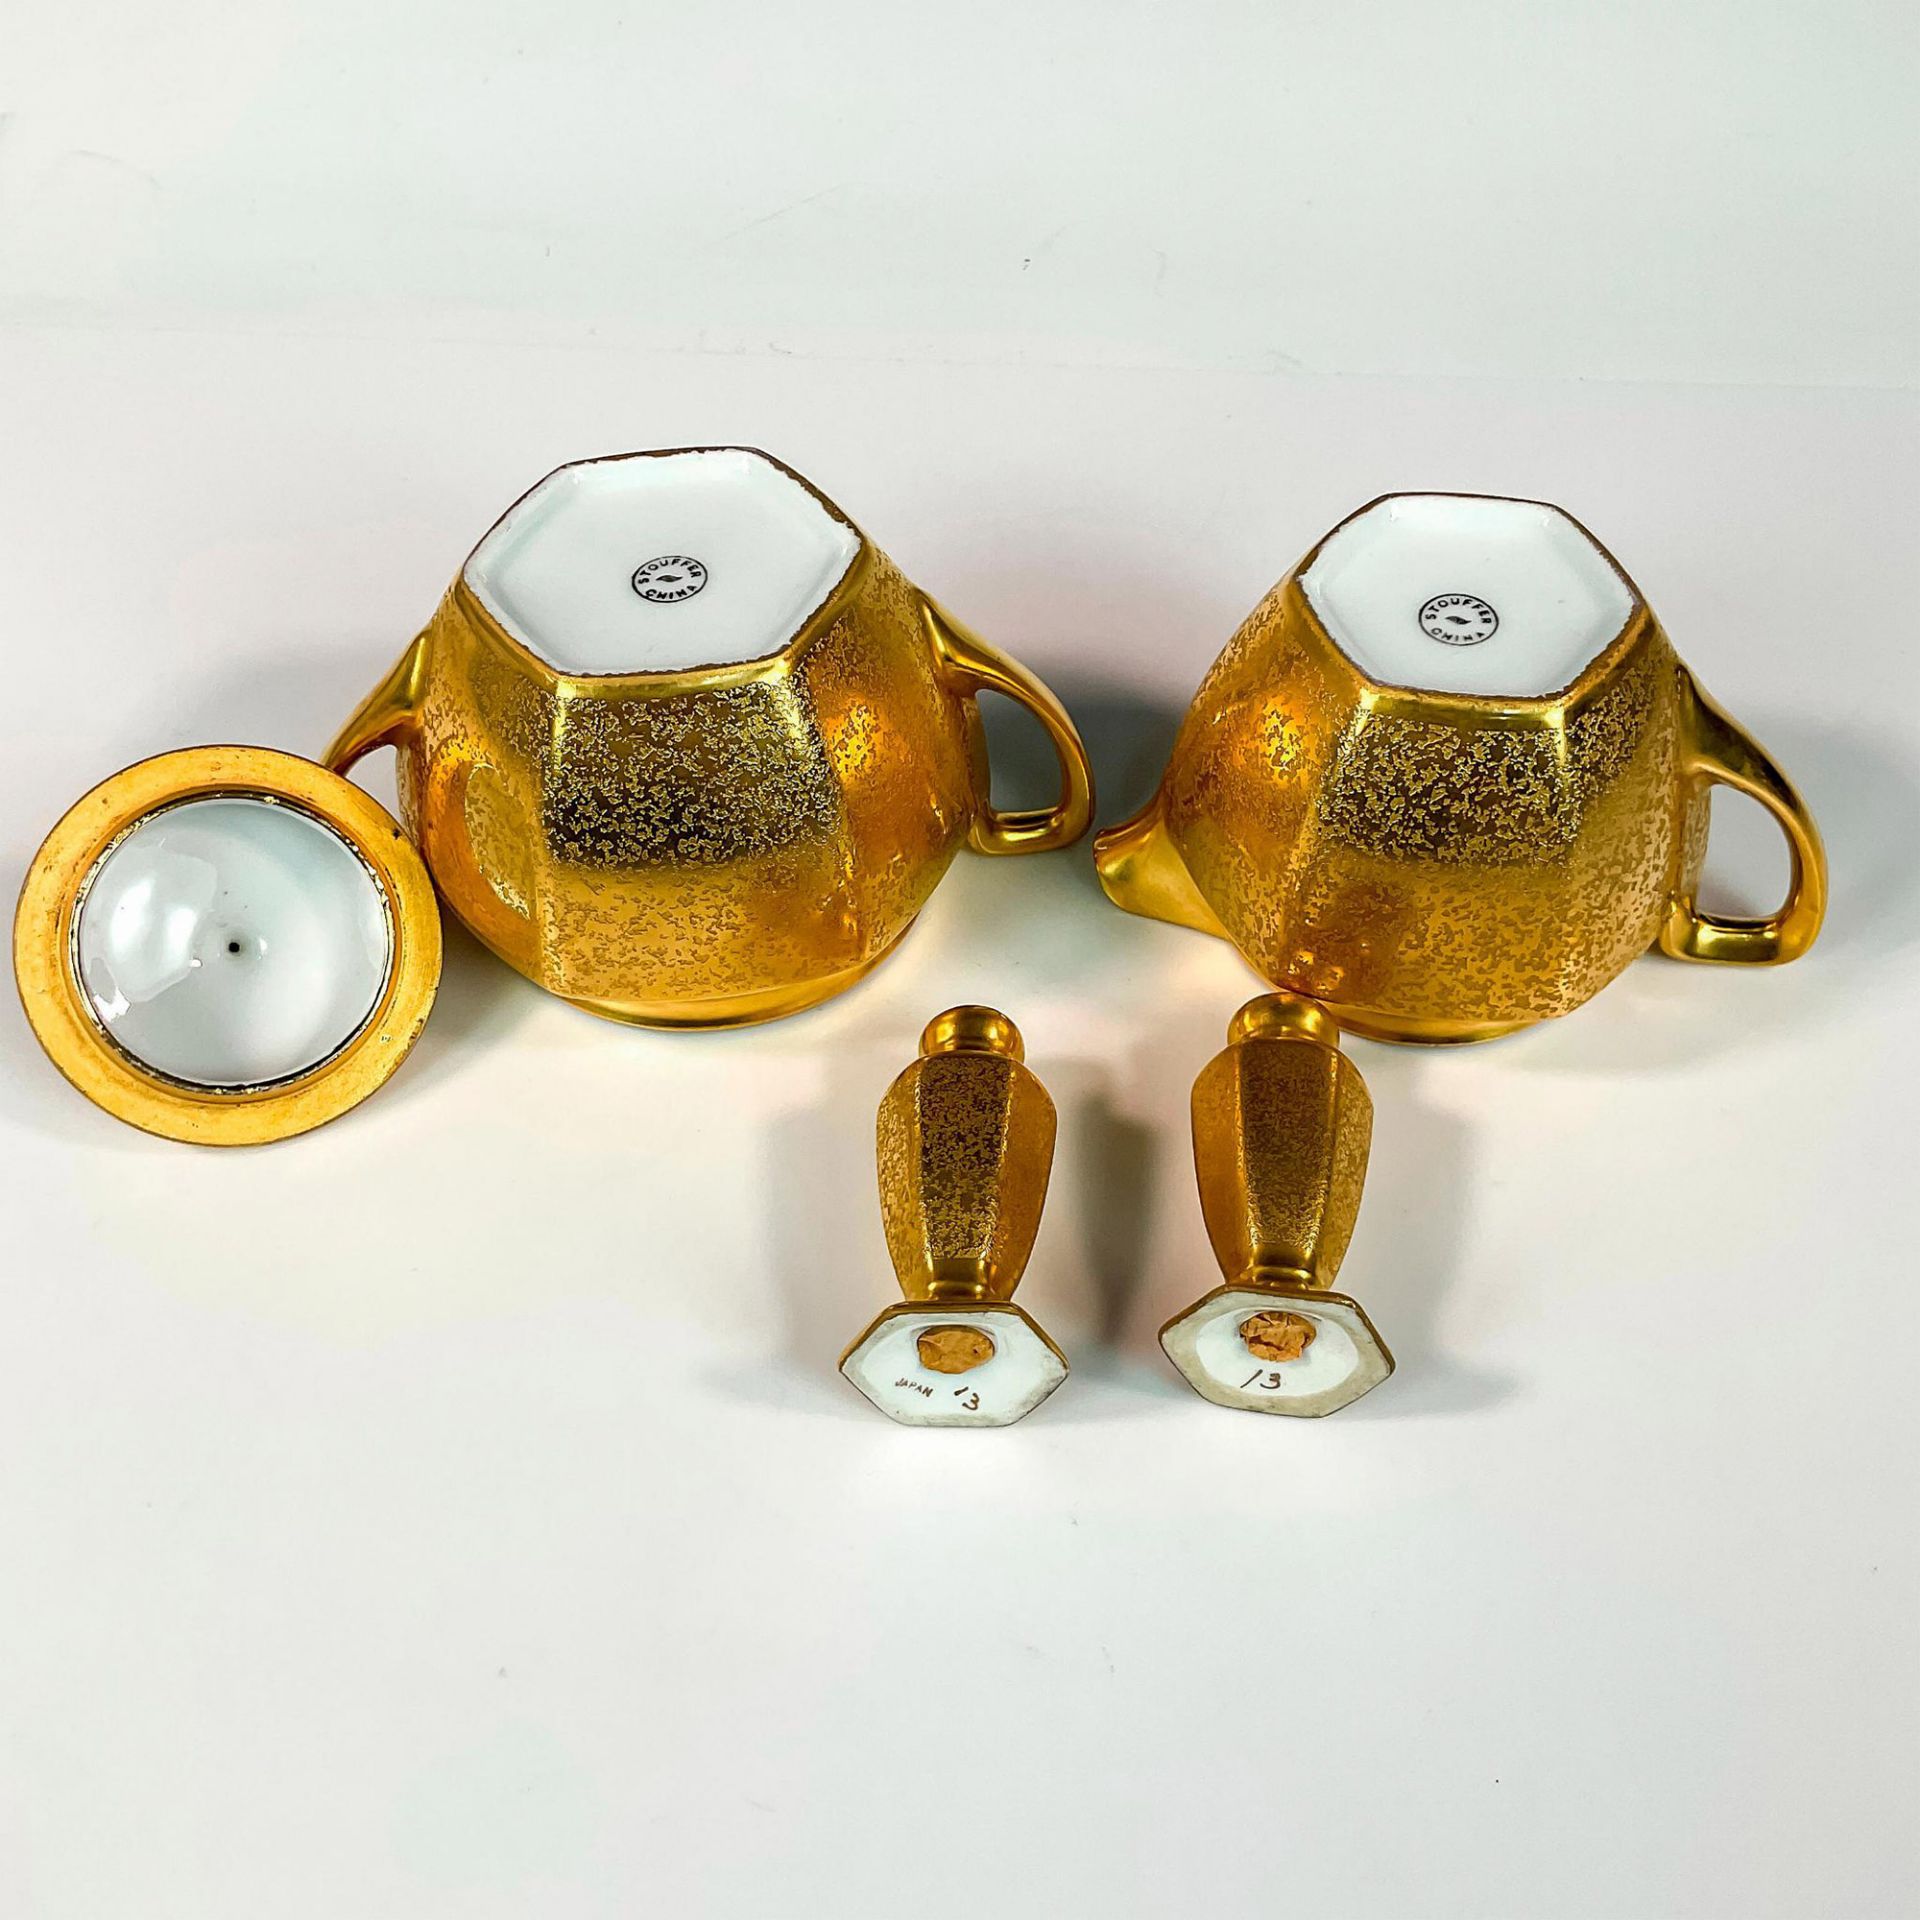 4pc Stouffer and Pickard Porcelain Gilt Tableware Set - Image 5 of 7